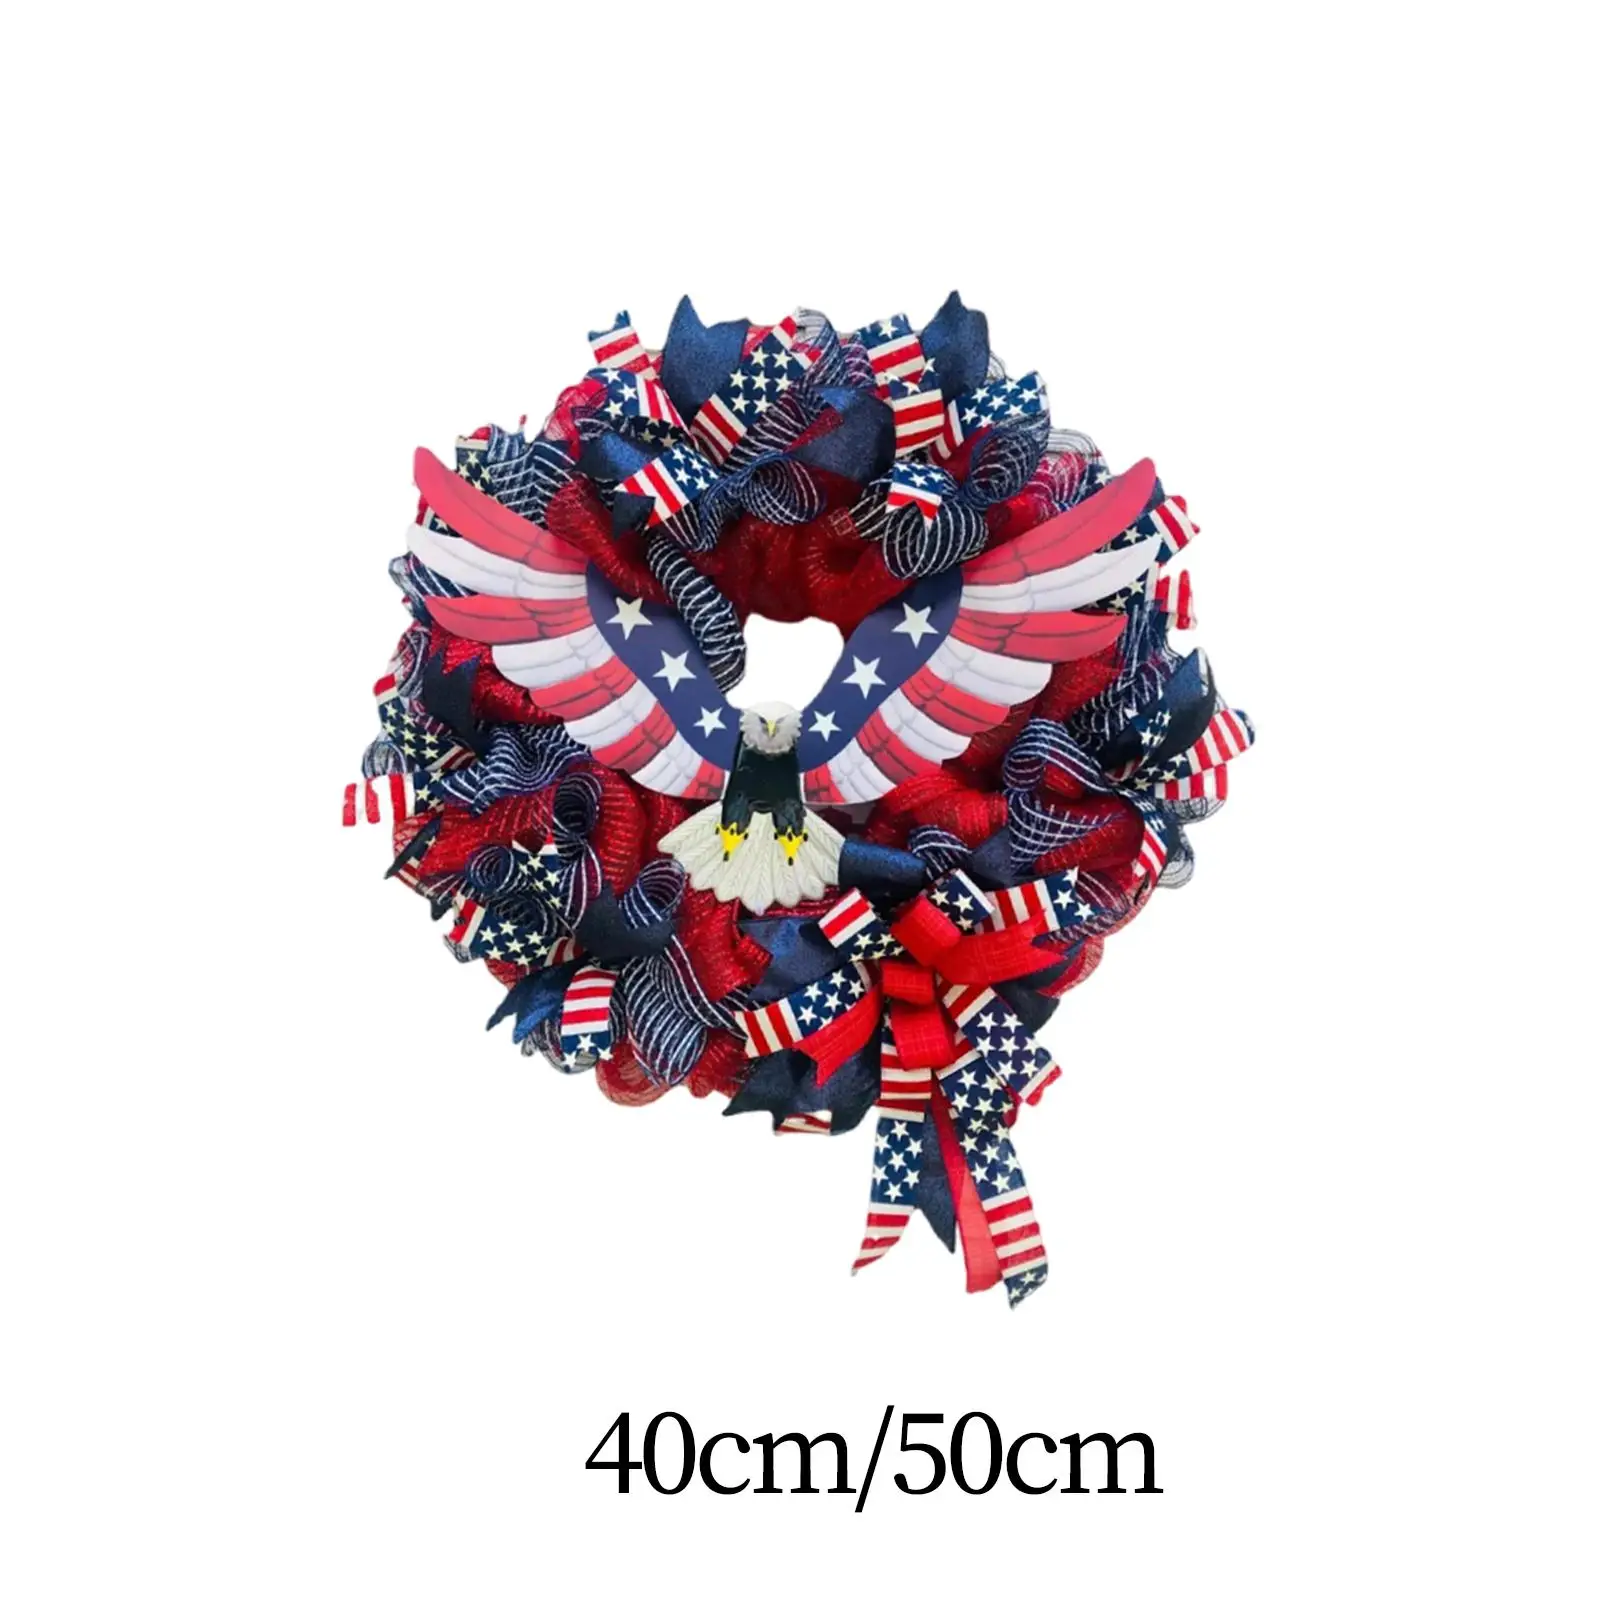 4TH of July Patriotic  Mesh Wreath for Independence Day Fine Craftsmanship Indoor and Outdoor Red White Blue Handcrafted